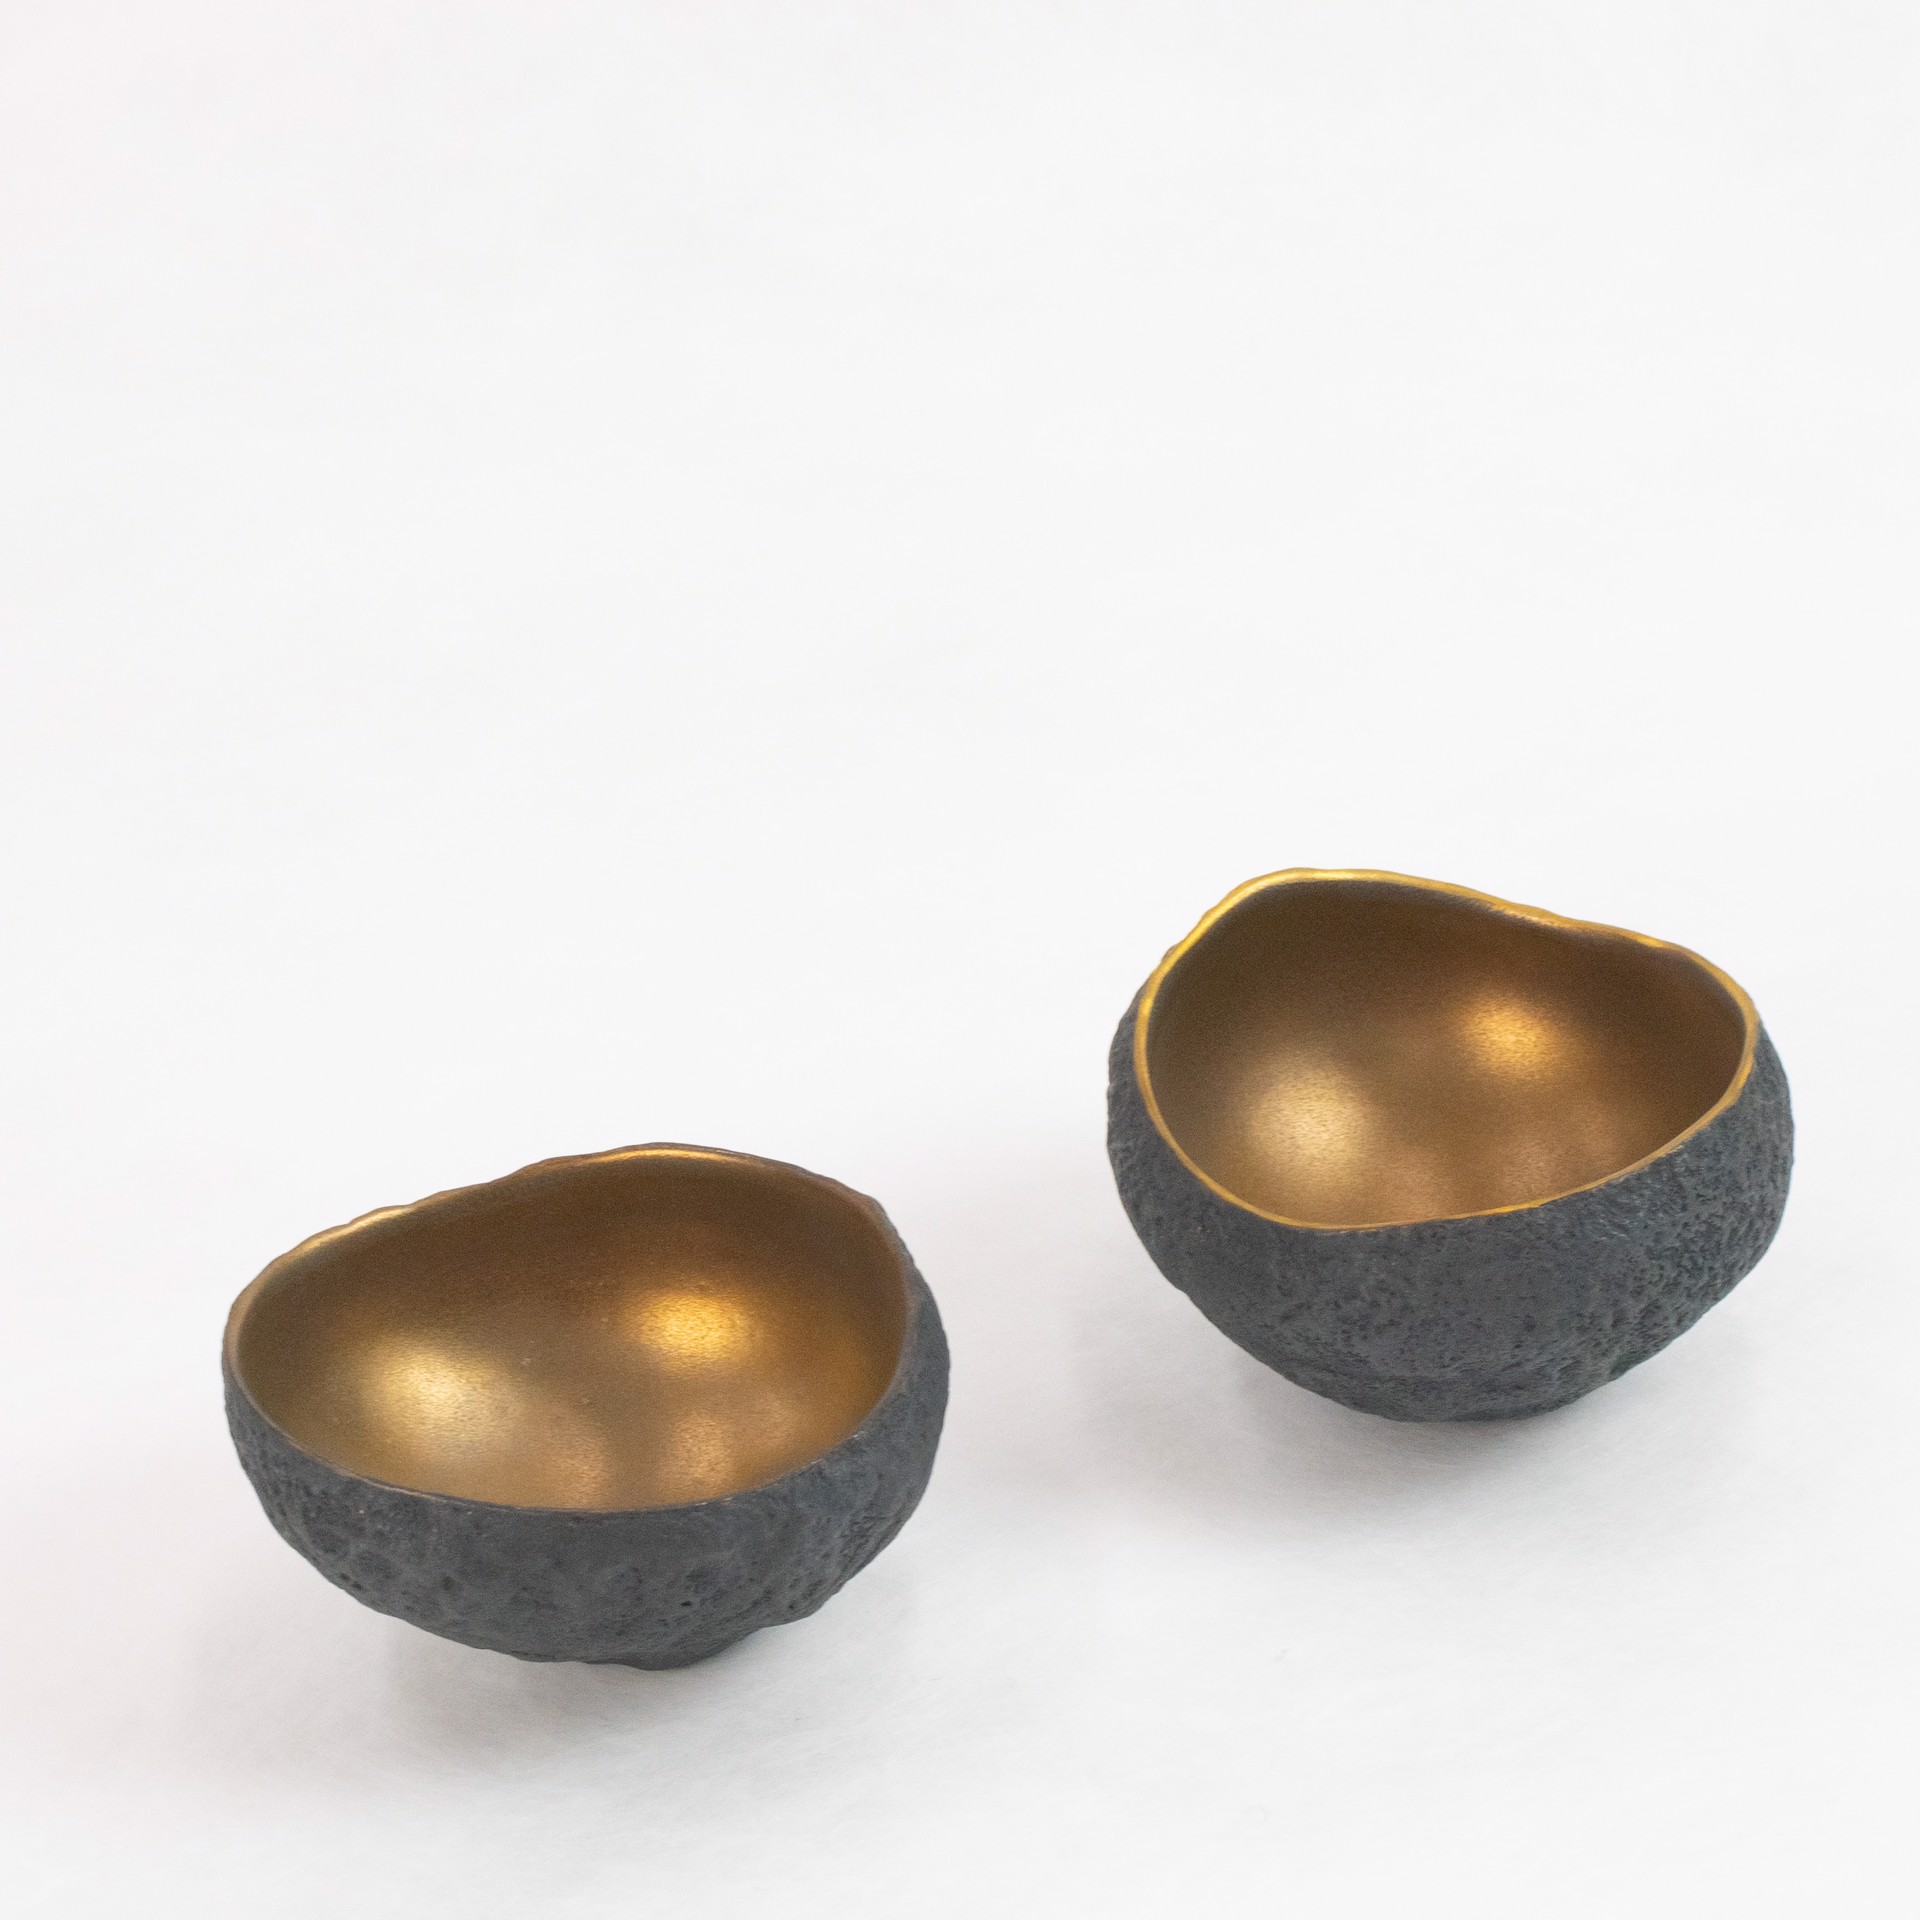 Small vessels with bronze